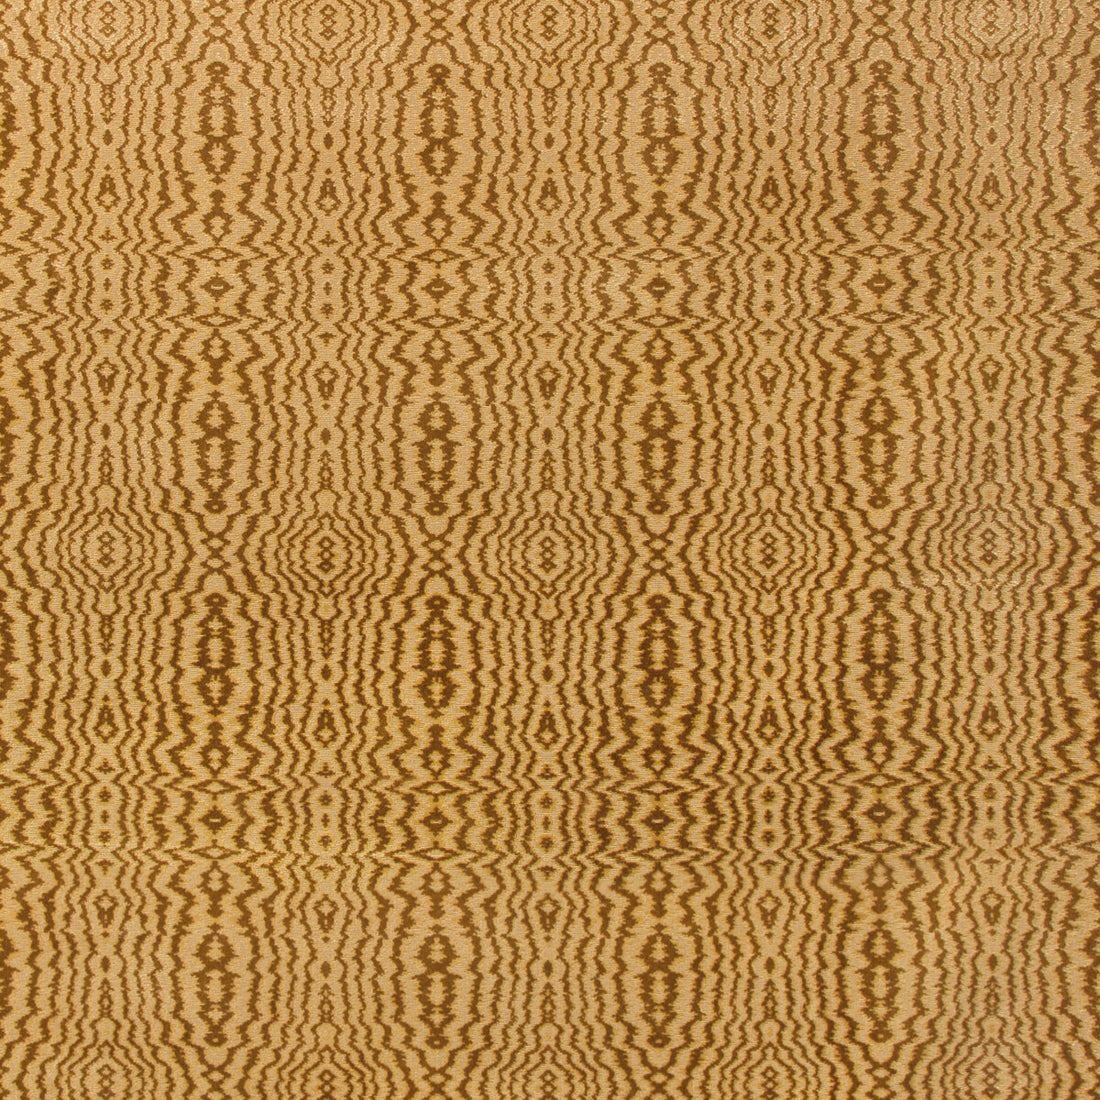 Callow Velvet fabric in golden color - pattern 2019119.404.0 - by Lee Jofa in the Harlington Velvets collection